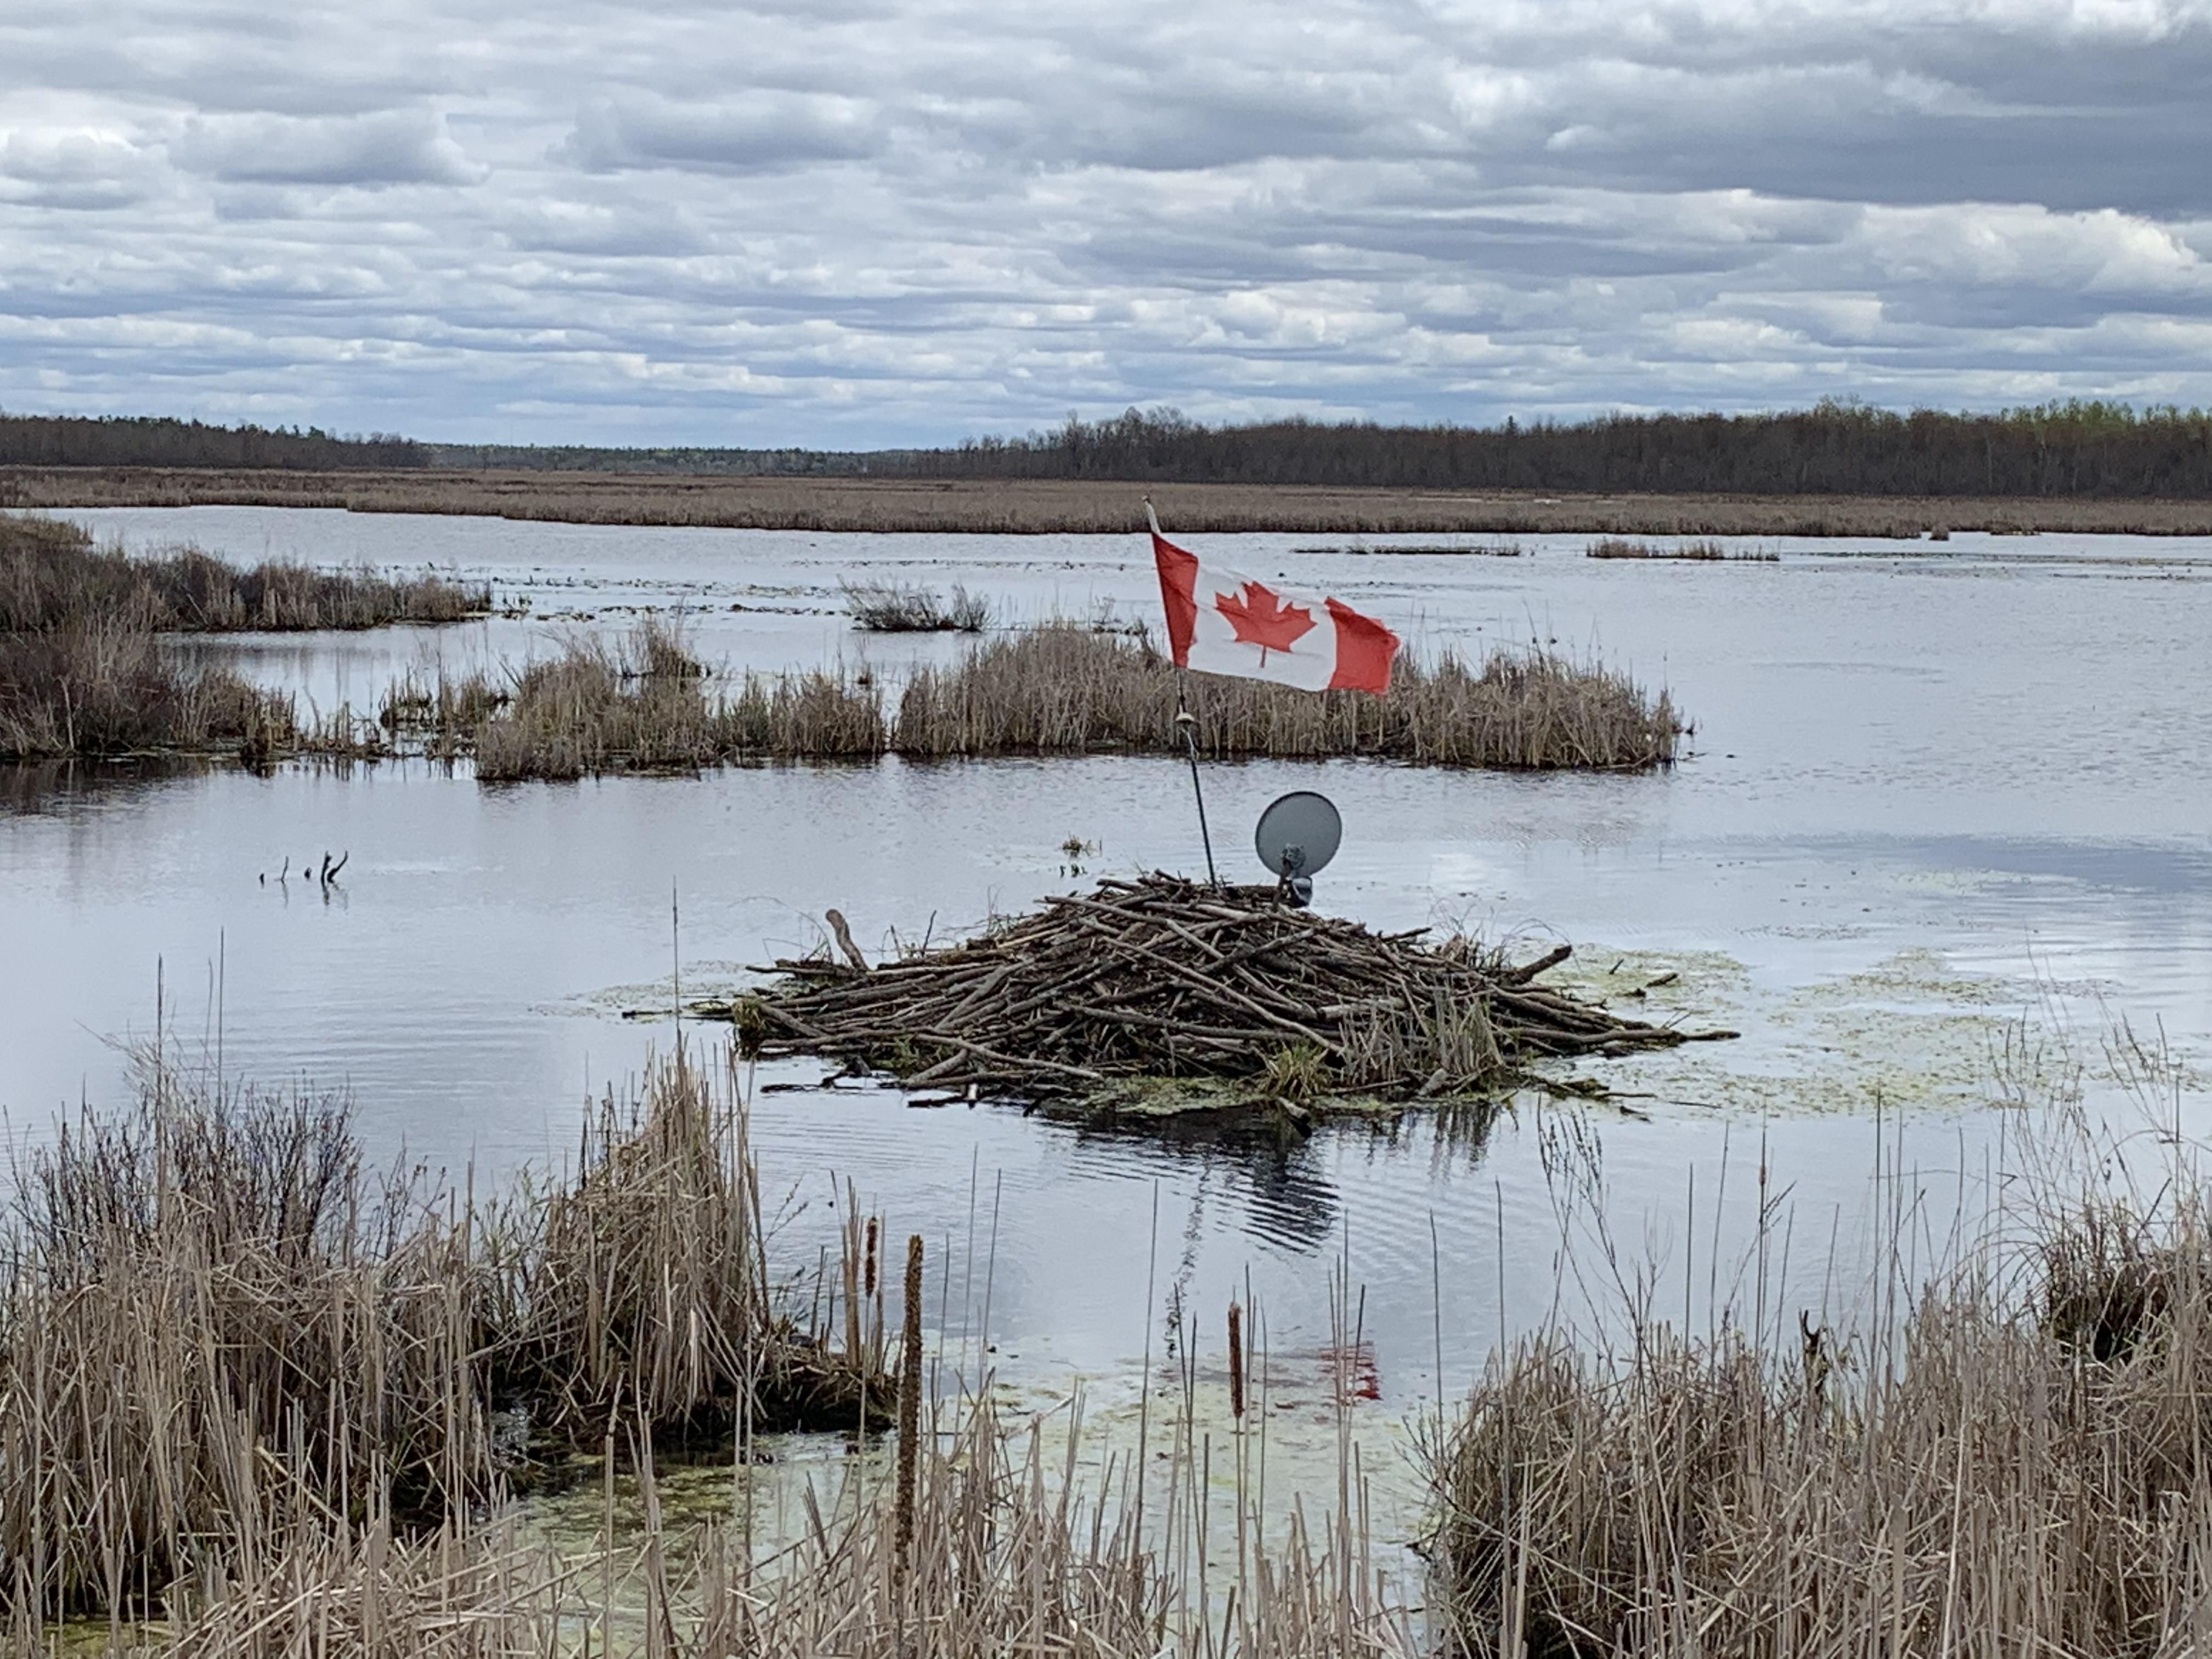 Beaver Dam with Canadian flag and satellite dish to watch the game.